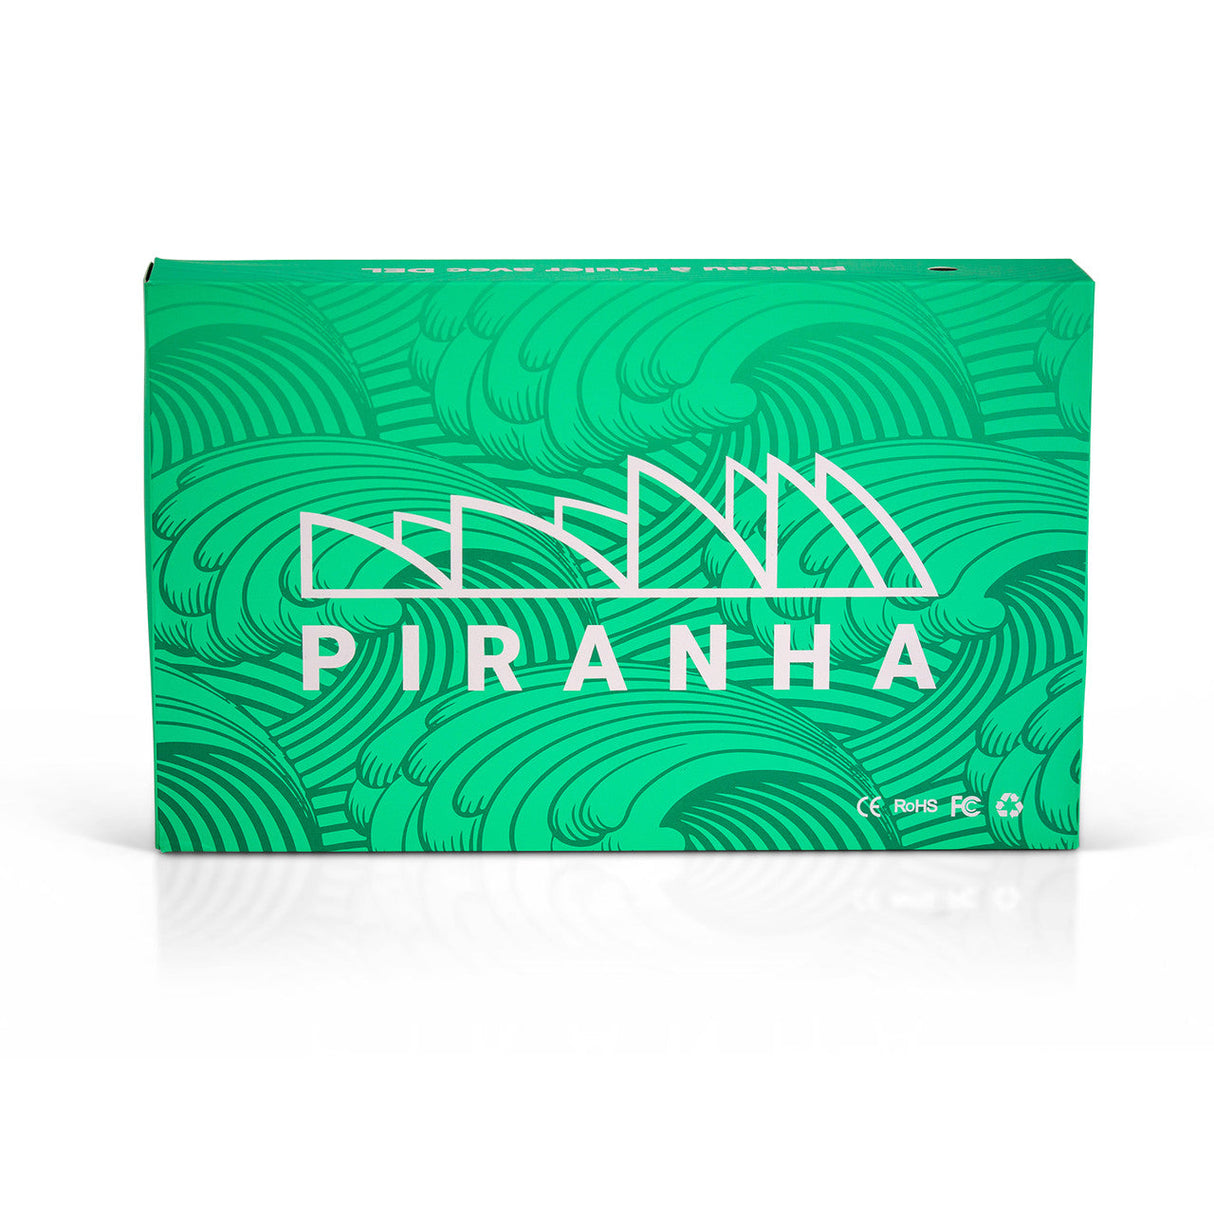 Piranha LED Rolling Tray front view with vibrant green wave pattern and logo